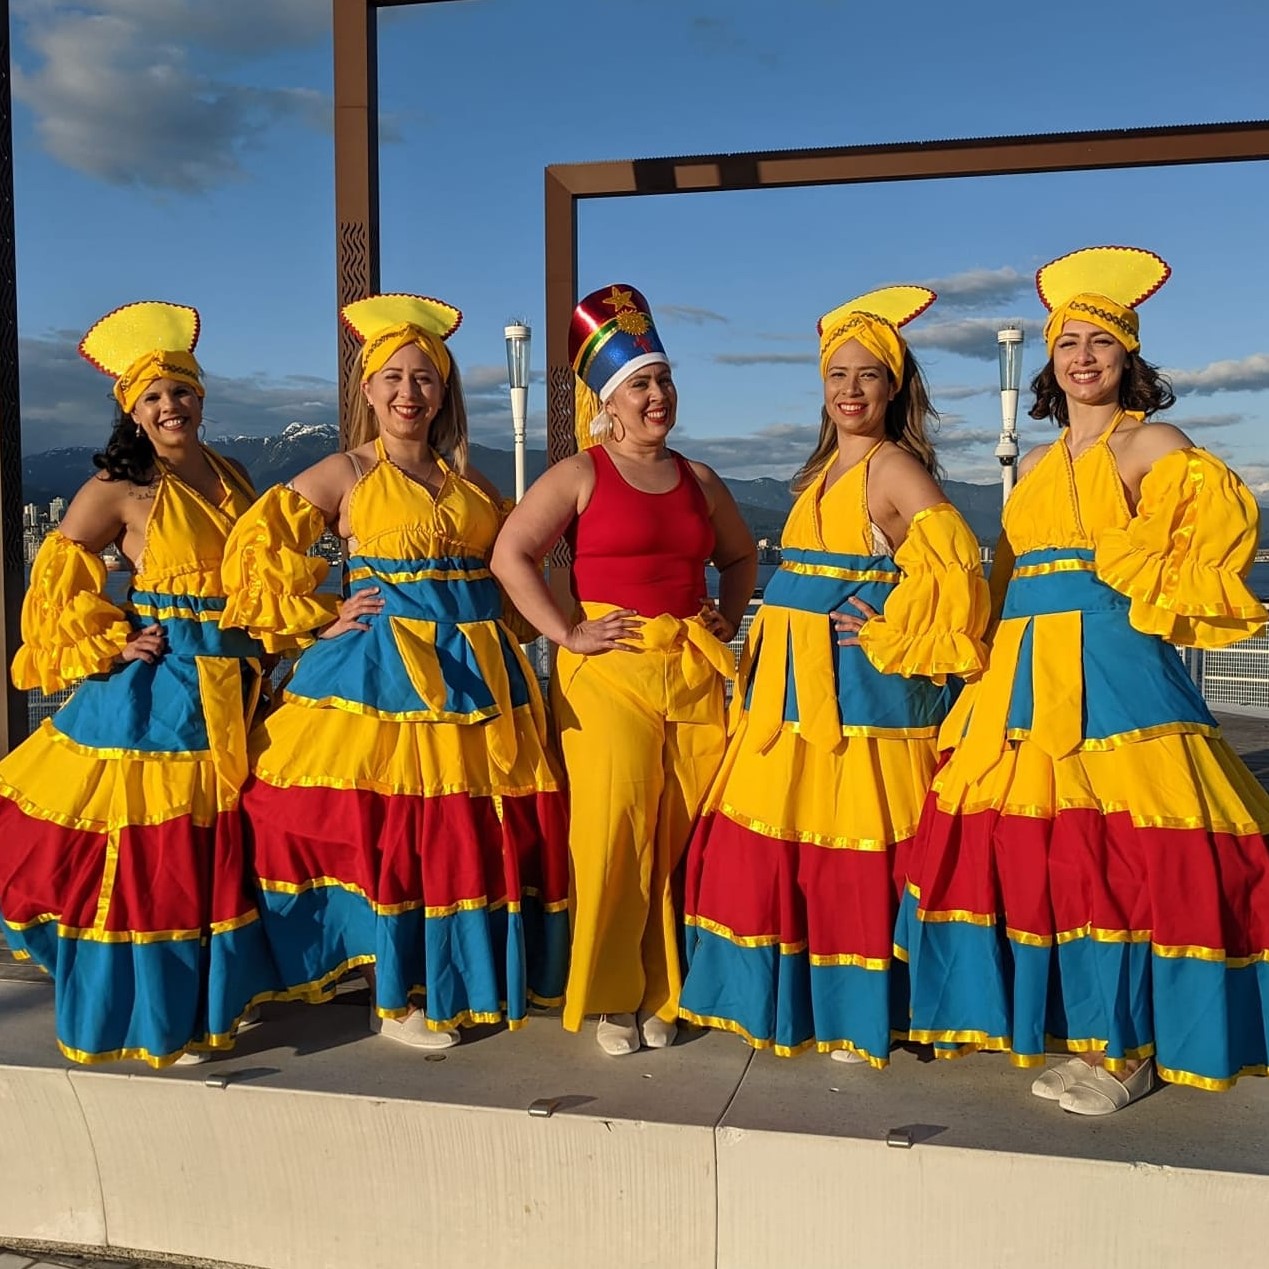 The image features a group of women wearing colorful dresses. They are part of a Brazilian Swag dance group, showcasing their vibrant attire and possibly performing a dance routine outdoors. The women seem to be happy and smiling while engaging in the dance activity.